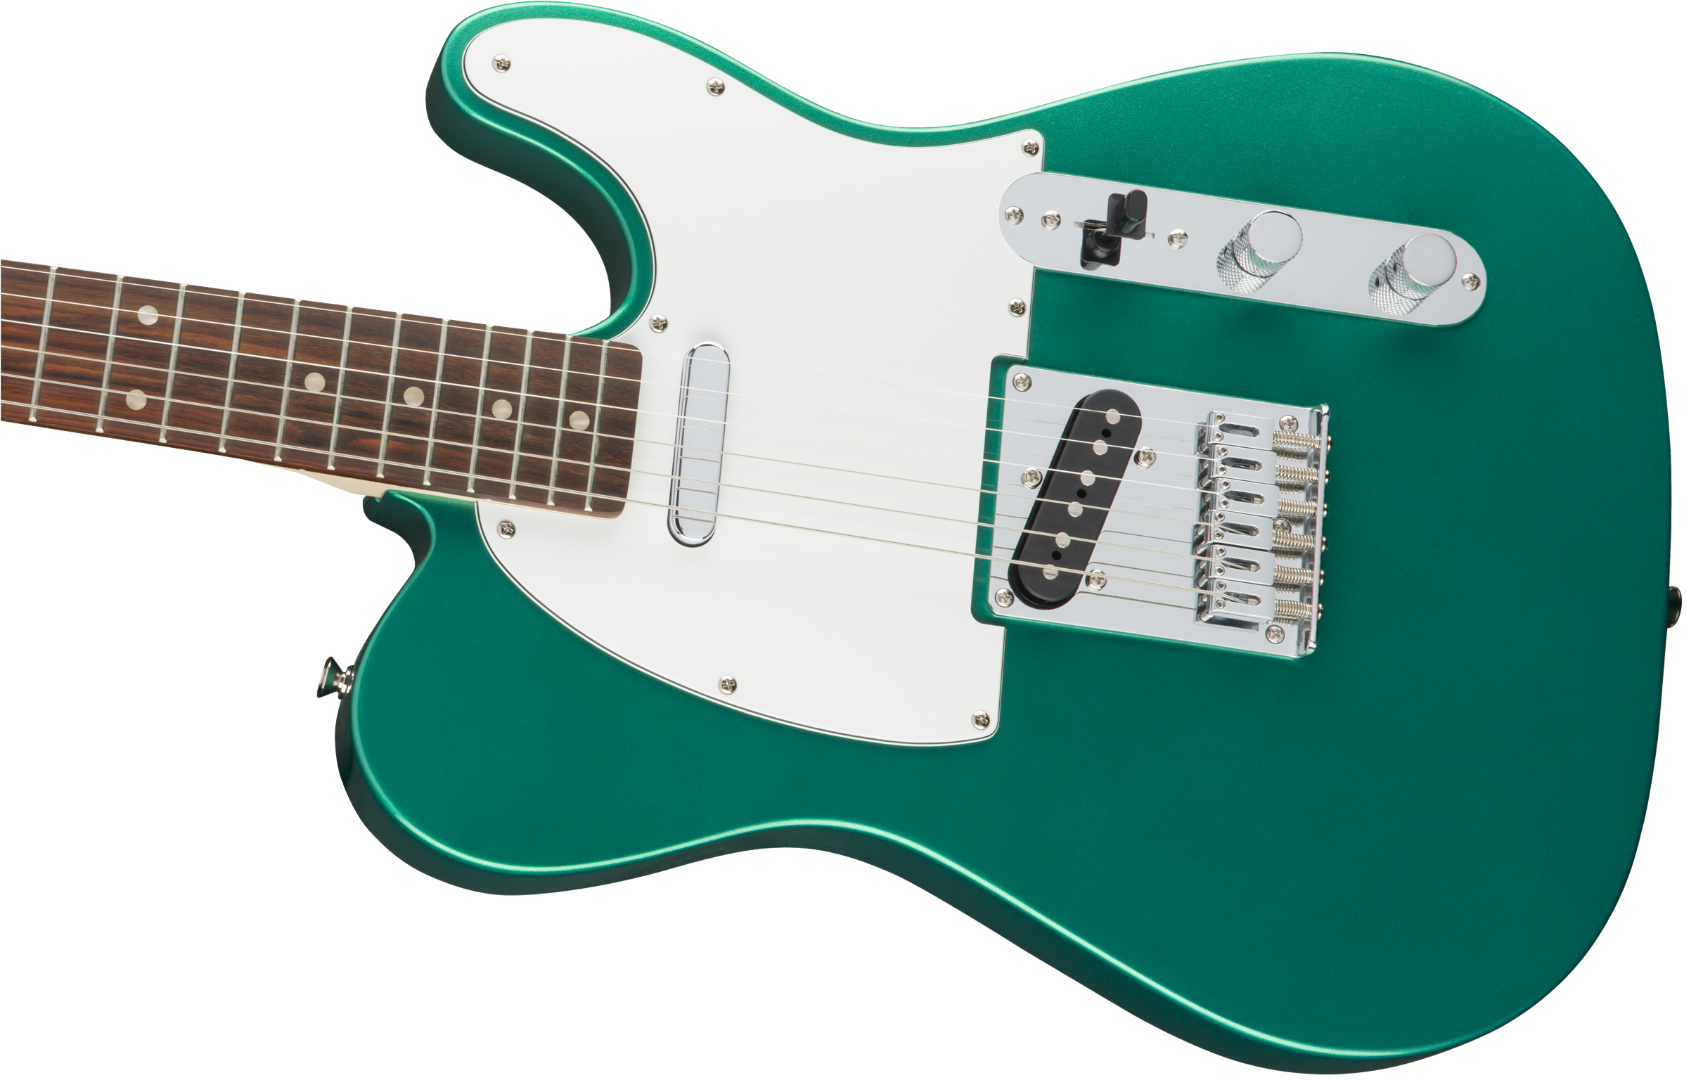 Butler Music Store - Squier Affinity Telecaster Green (1687x1080)